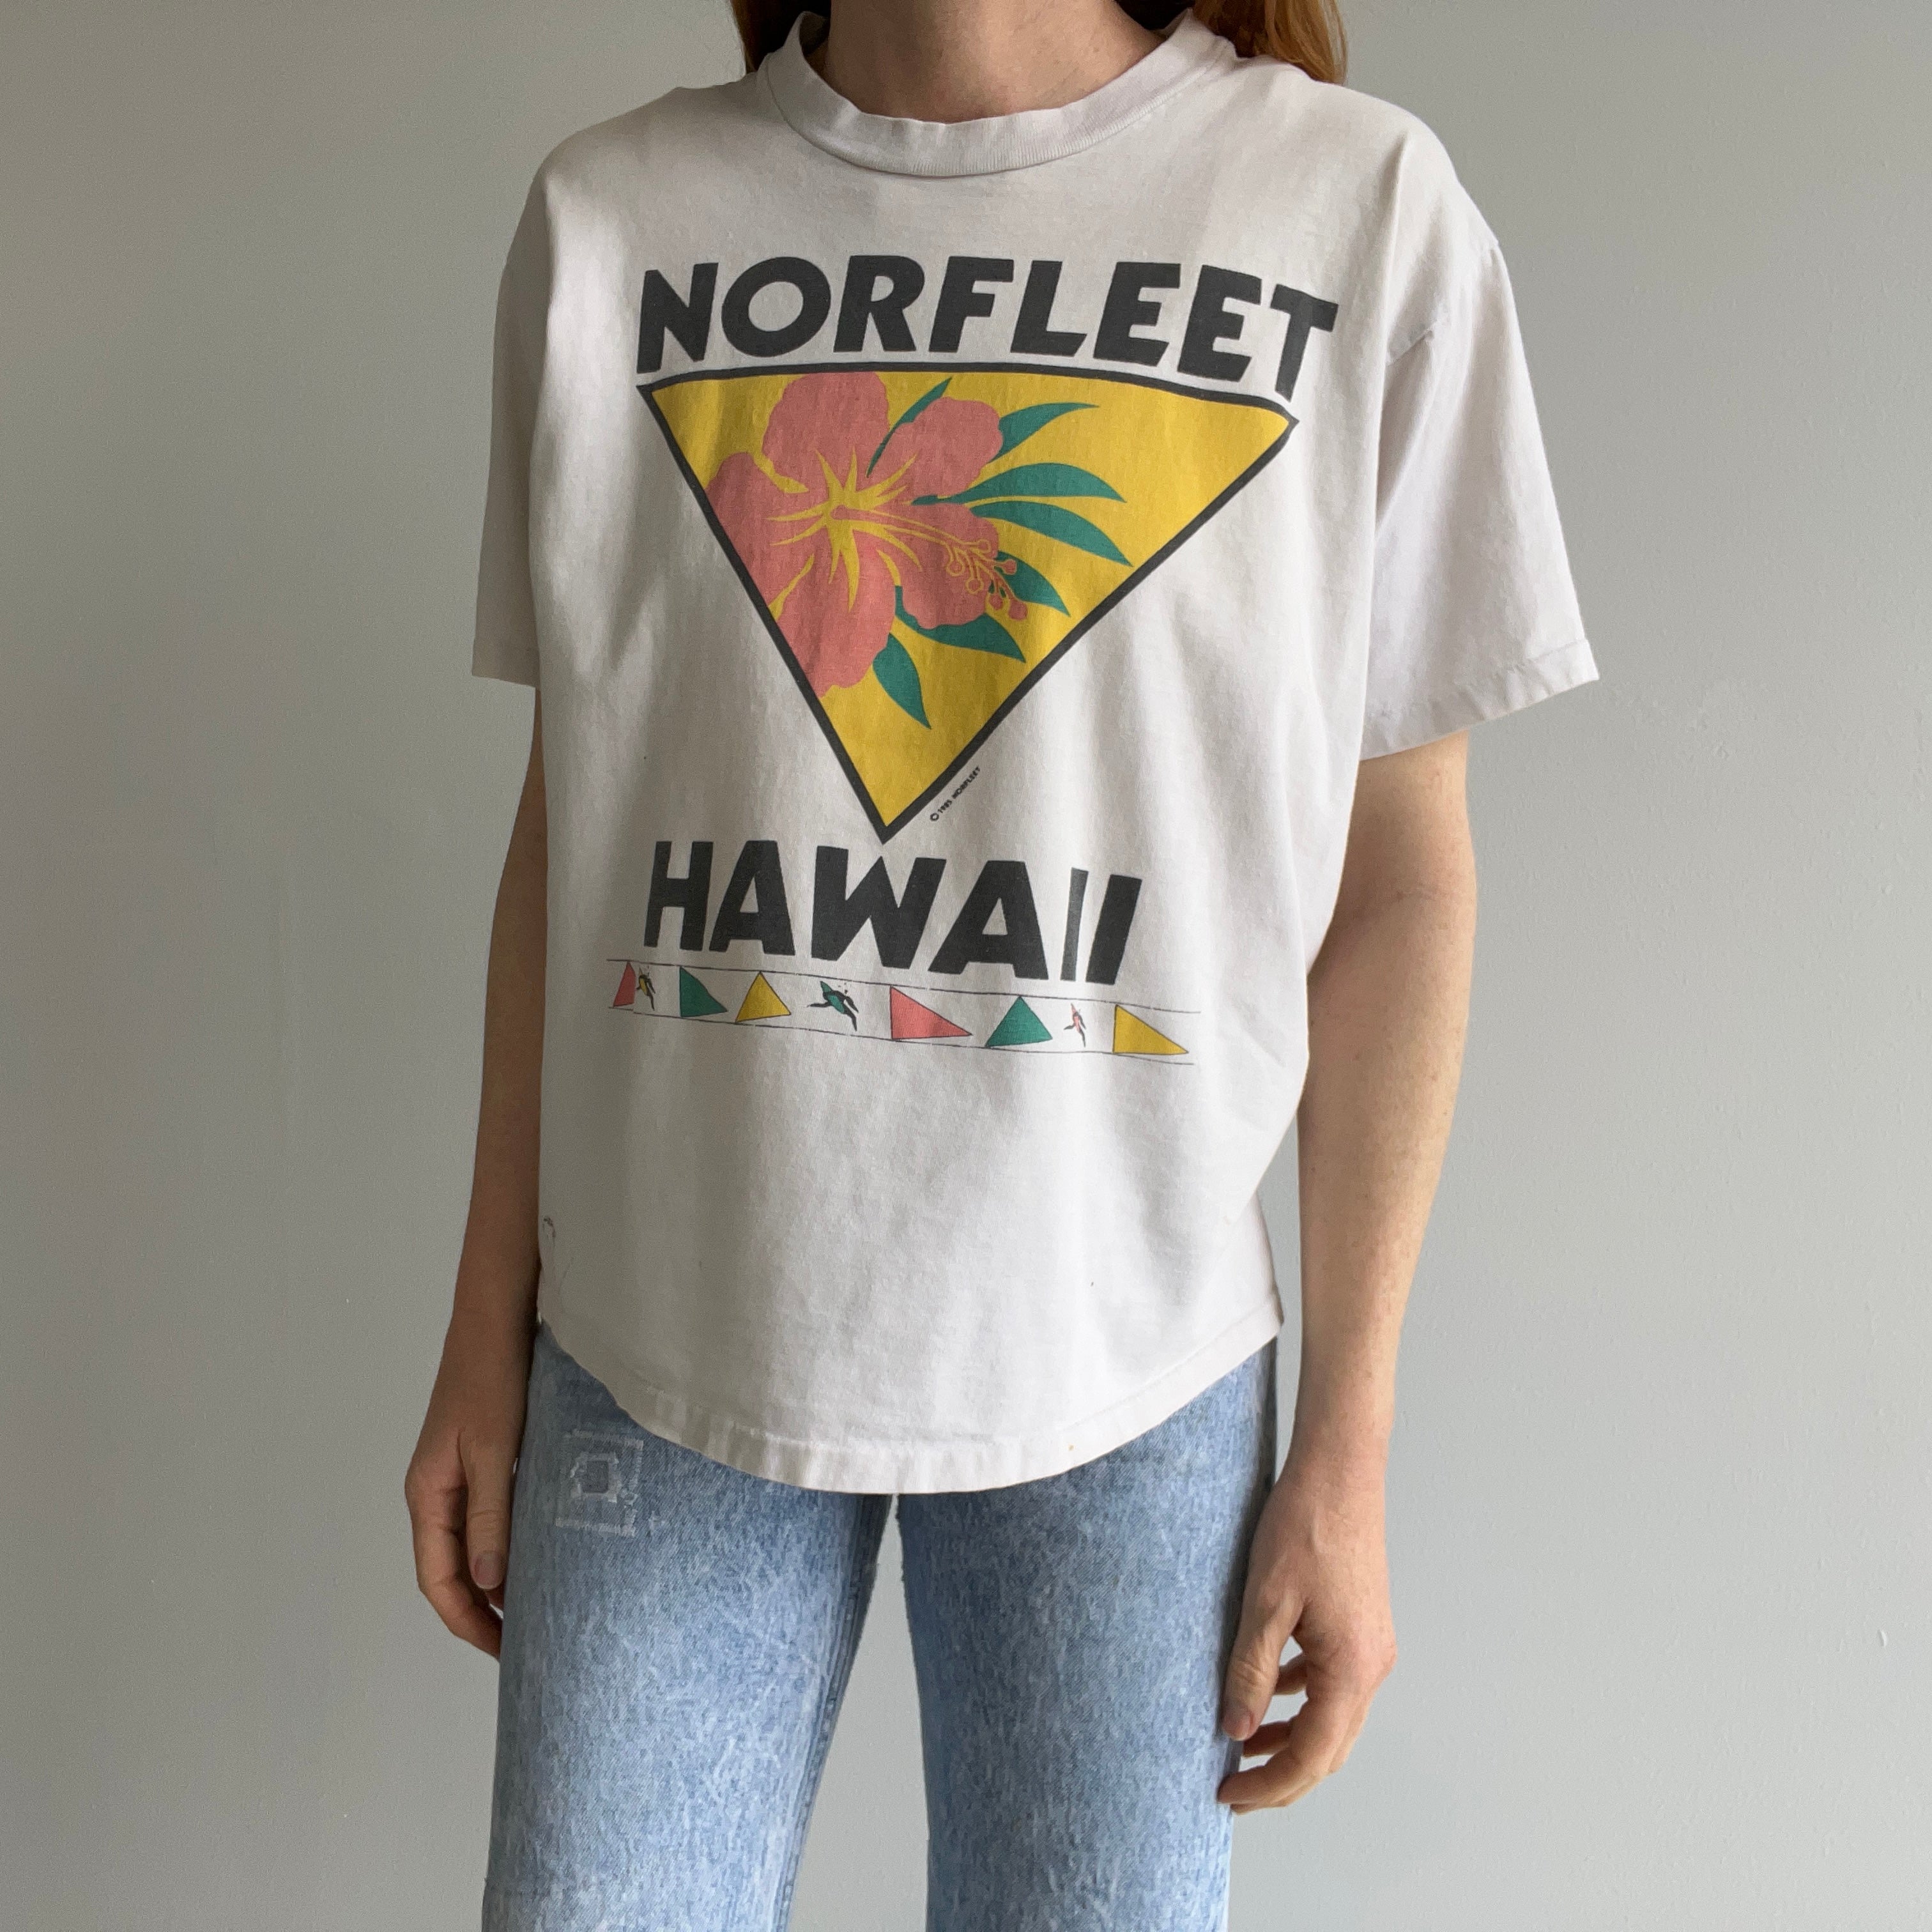 1985 Norfleet Hawaii Washed White T-Shirt - Worn to Perfection